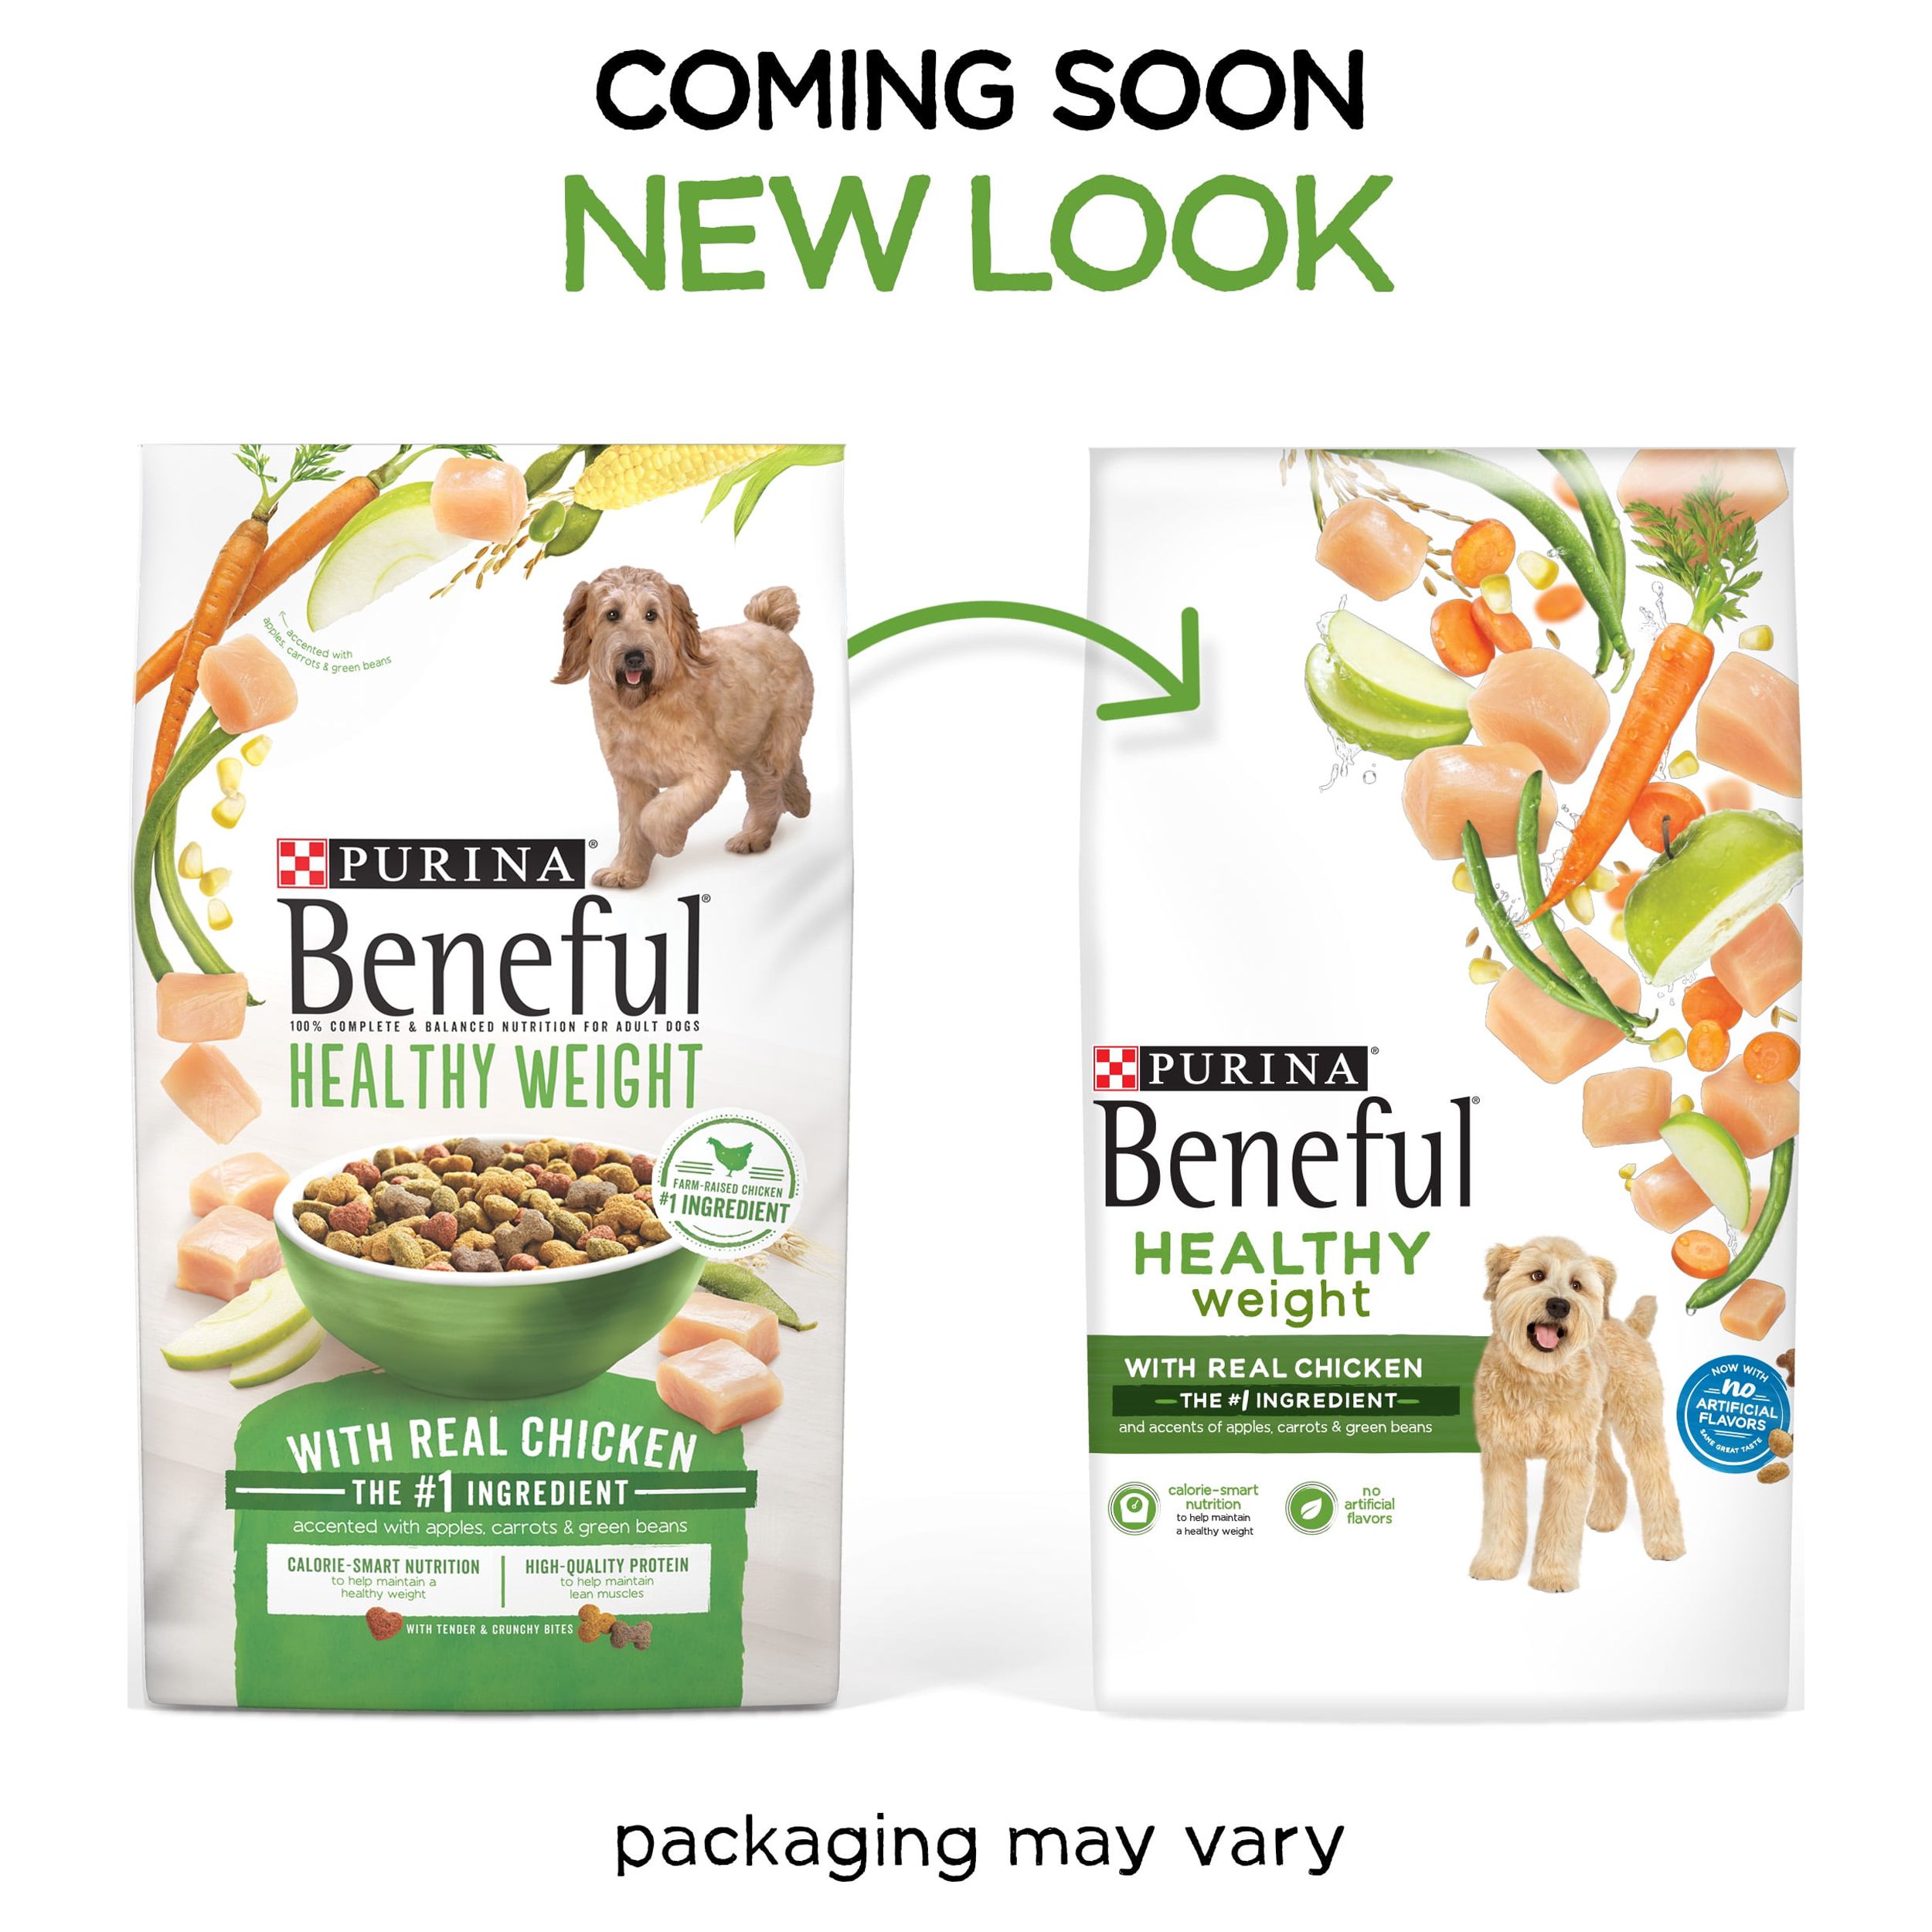 Purina Beneful Healthy Weight Dry Dog Food, Healthy Weight With Farm-Raised Chicken, 15.5 lb. Bag - image 3 of 15